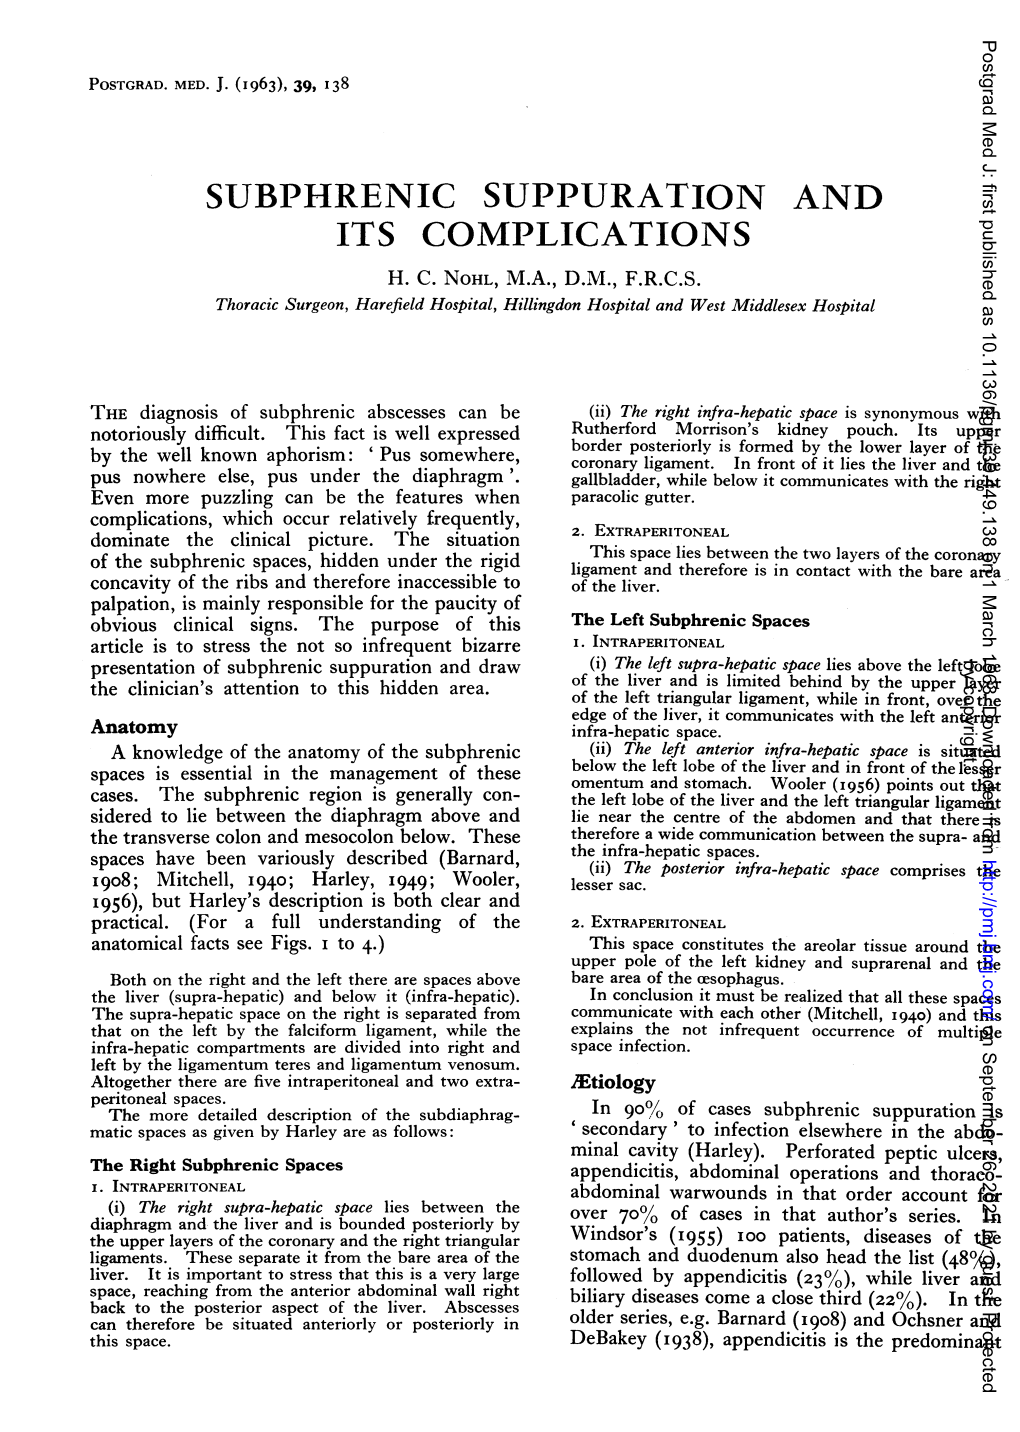 Subphrenic Suppuration and Its Complications H